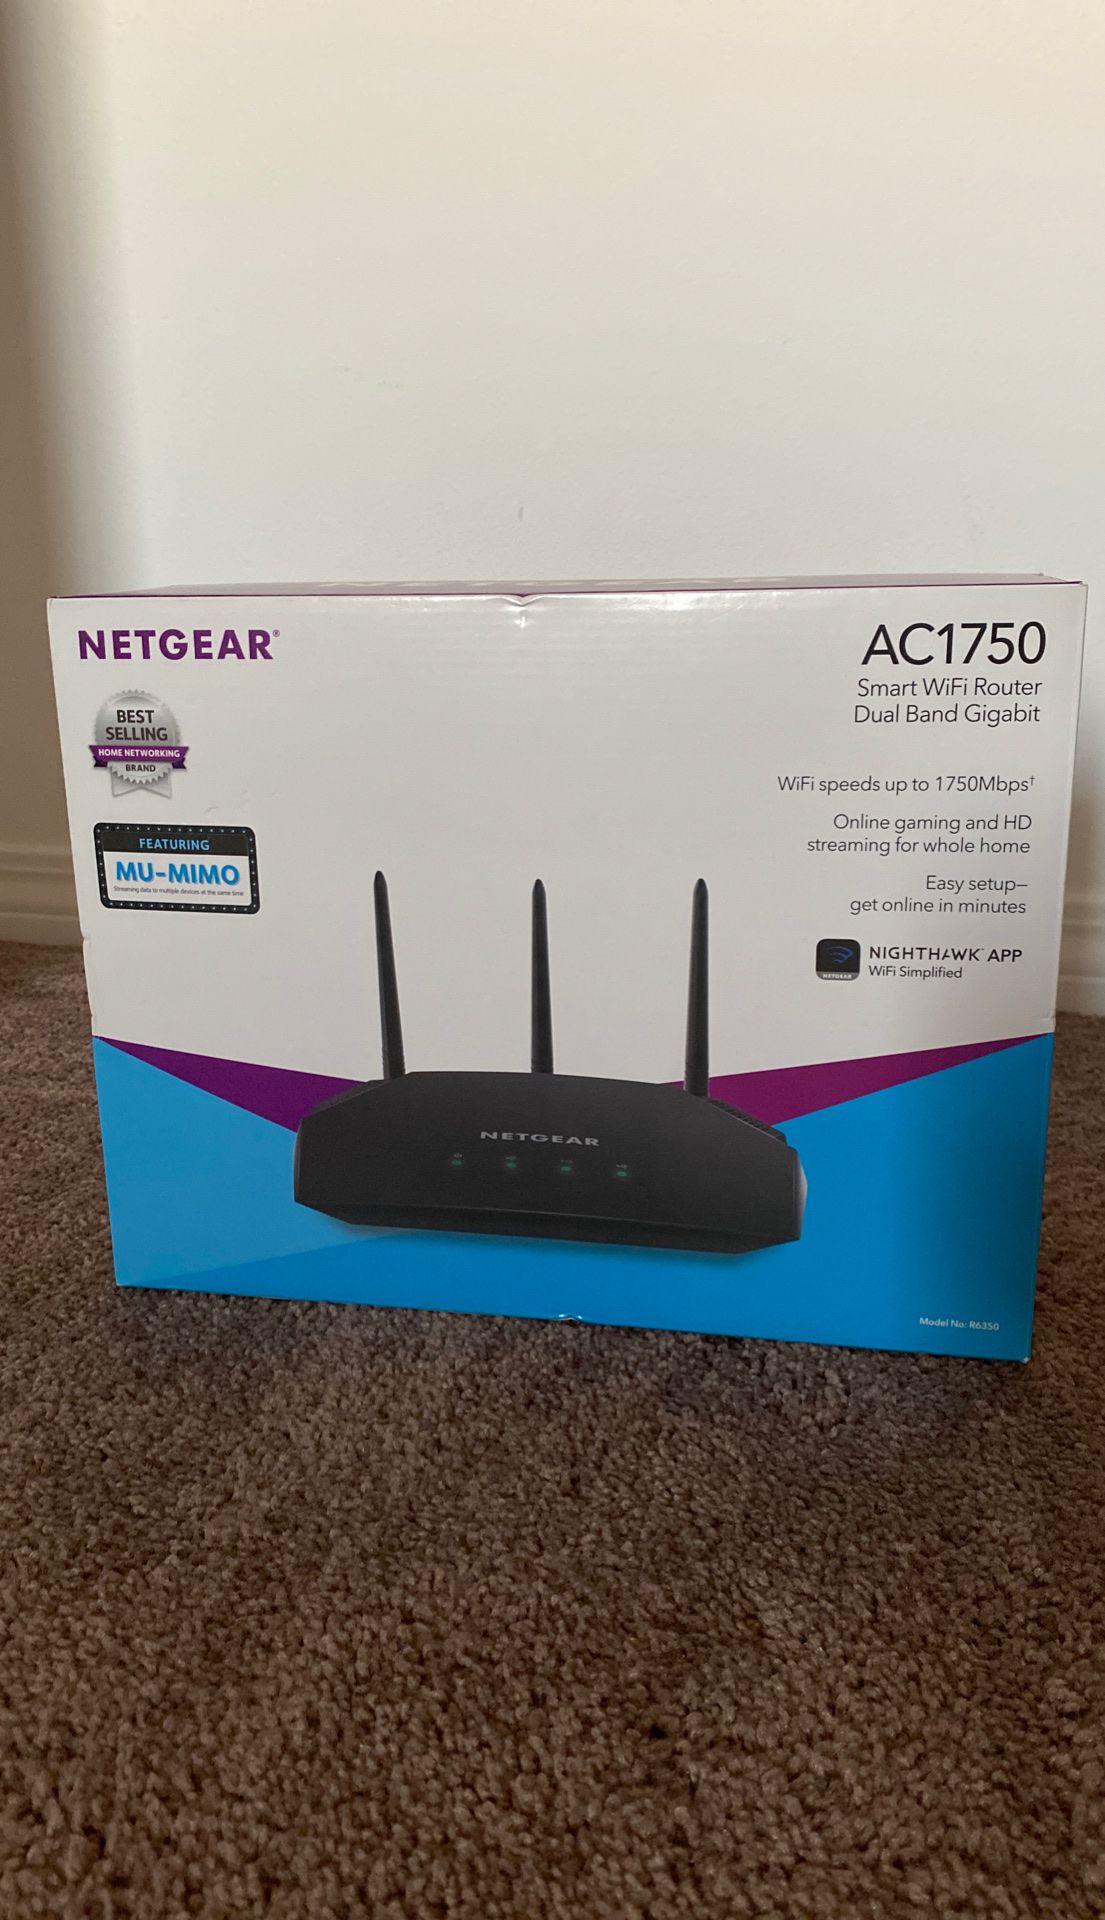 NETGEAR Router NEW great speeds WiFi speeds up to 1750 MBPS